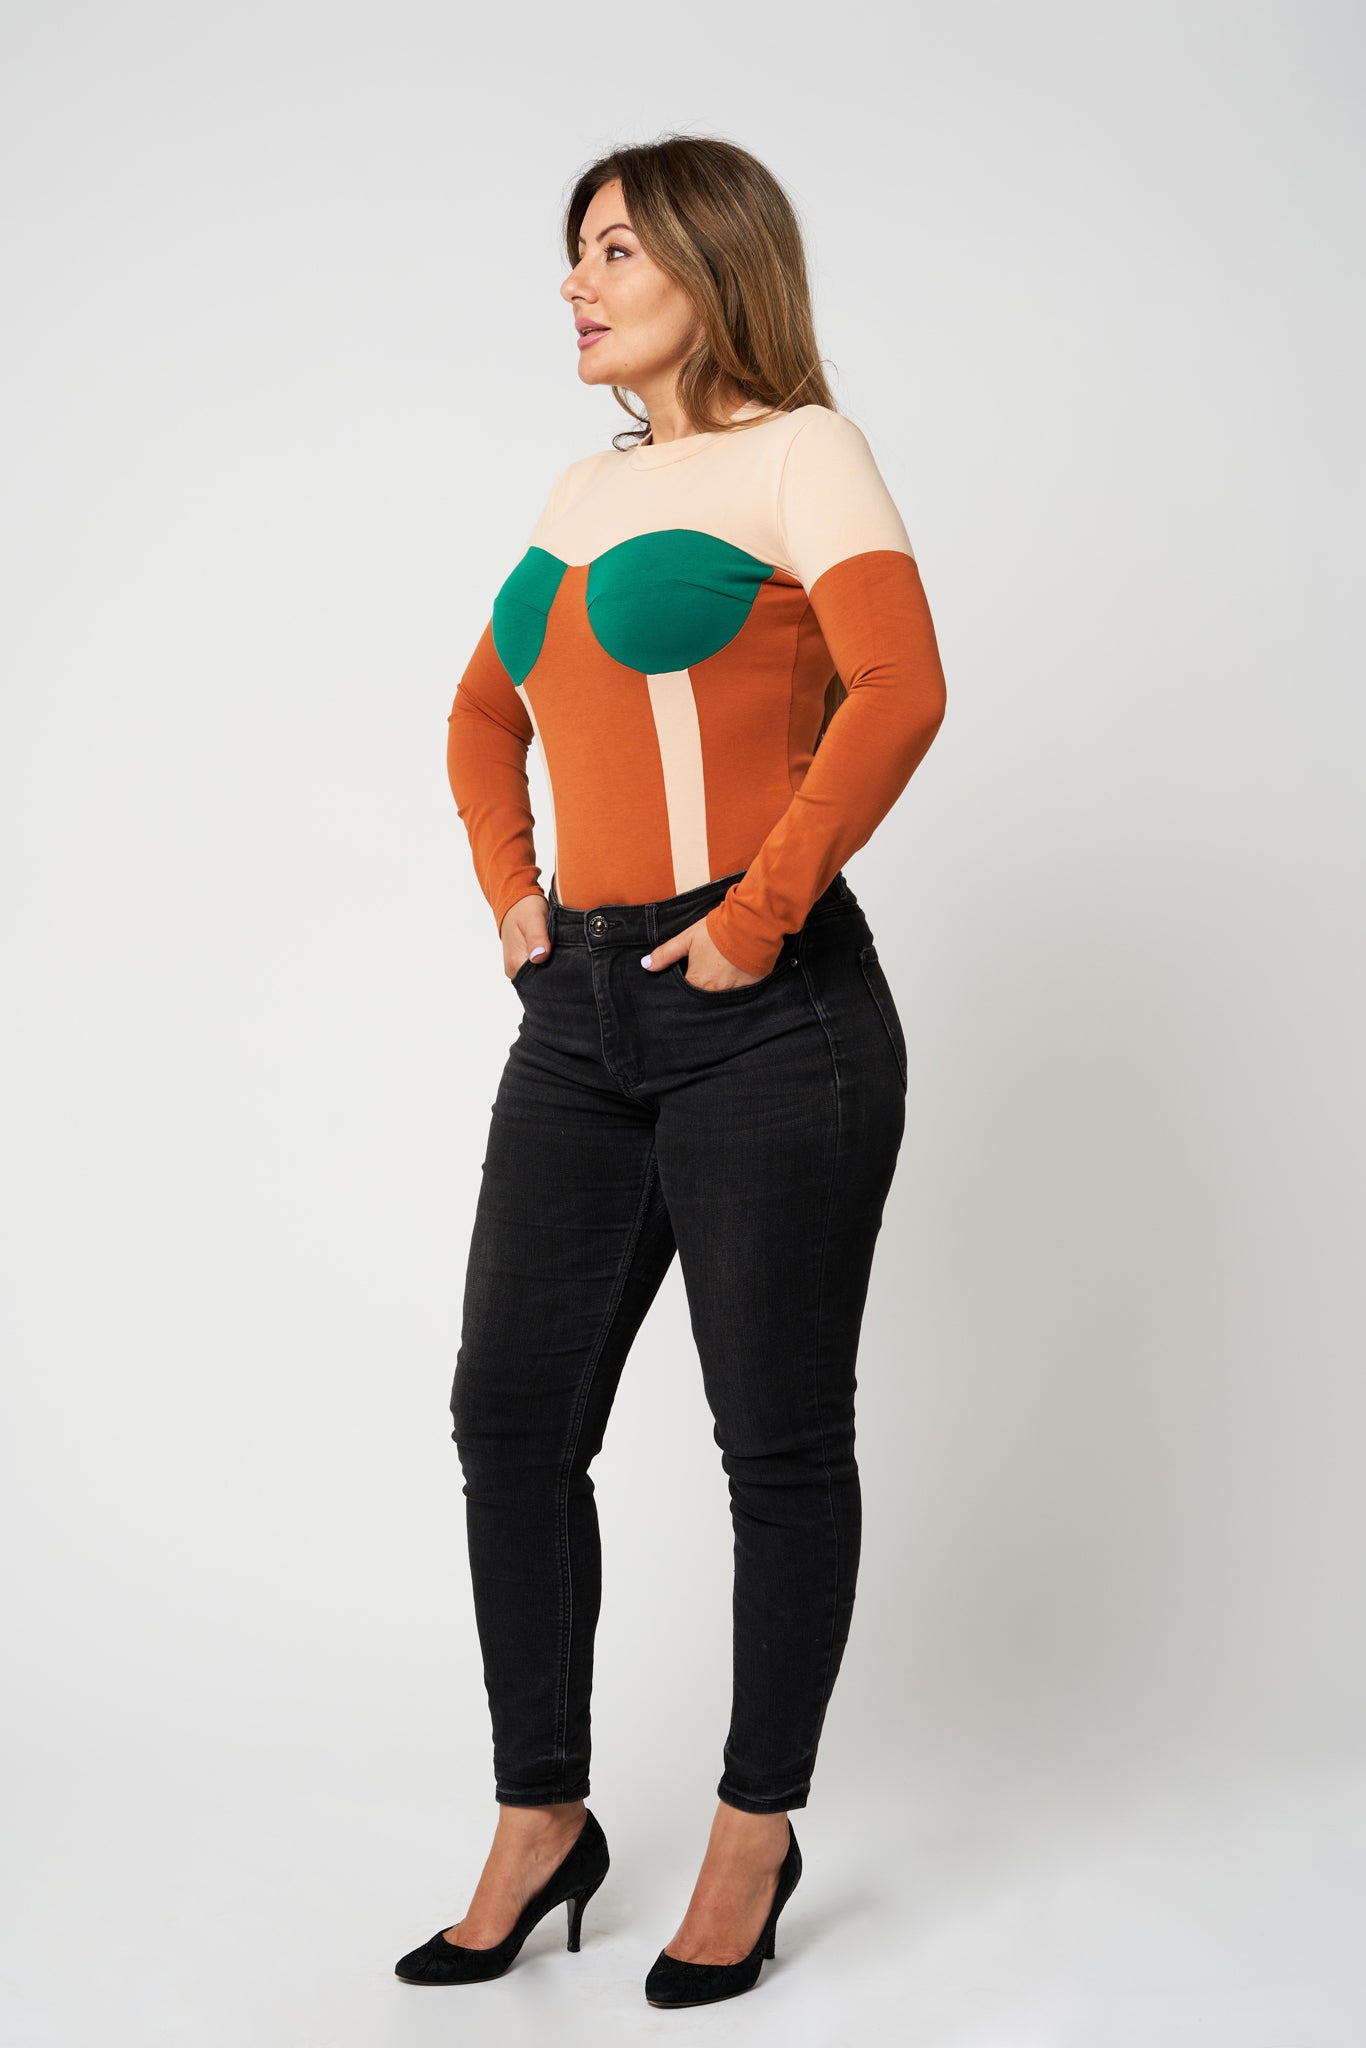 "Sloane" Bodysuit Crew Neck Corset Inspired Body Emerald Green Cups - front tilted to the left